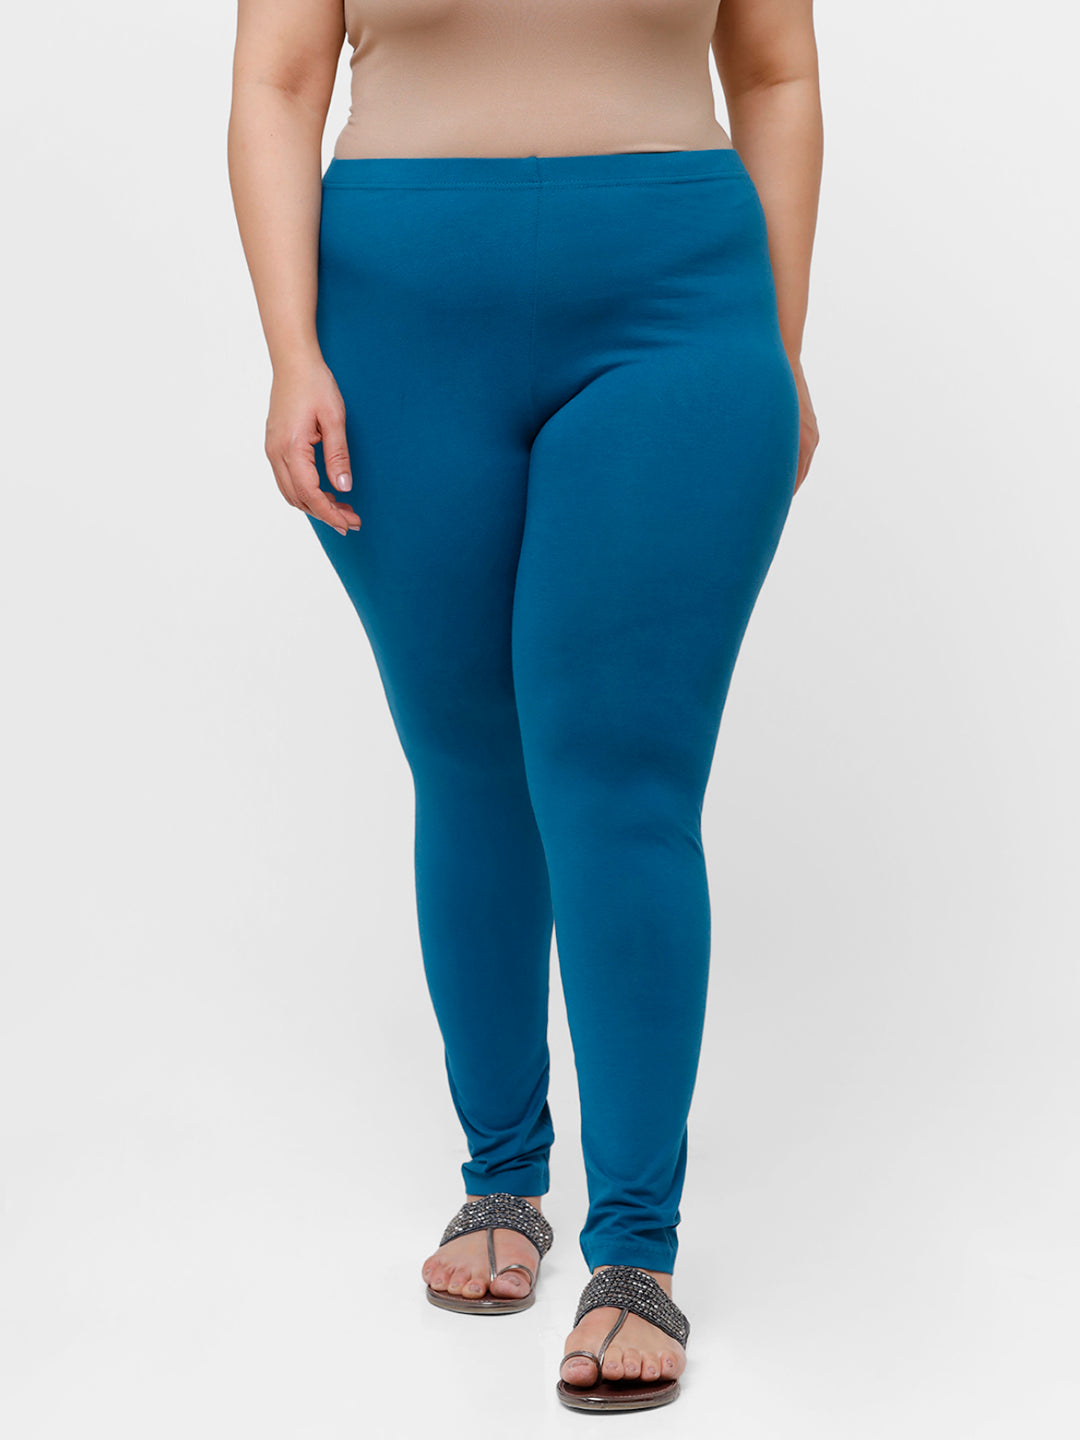 Fit for Me Women's Plus Size Printed Comfort/Performance Leggings (Teal  Lagoon/Triangle Geo Print, 1X, 16W) at Amazon Women's Clothing store